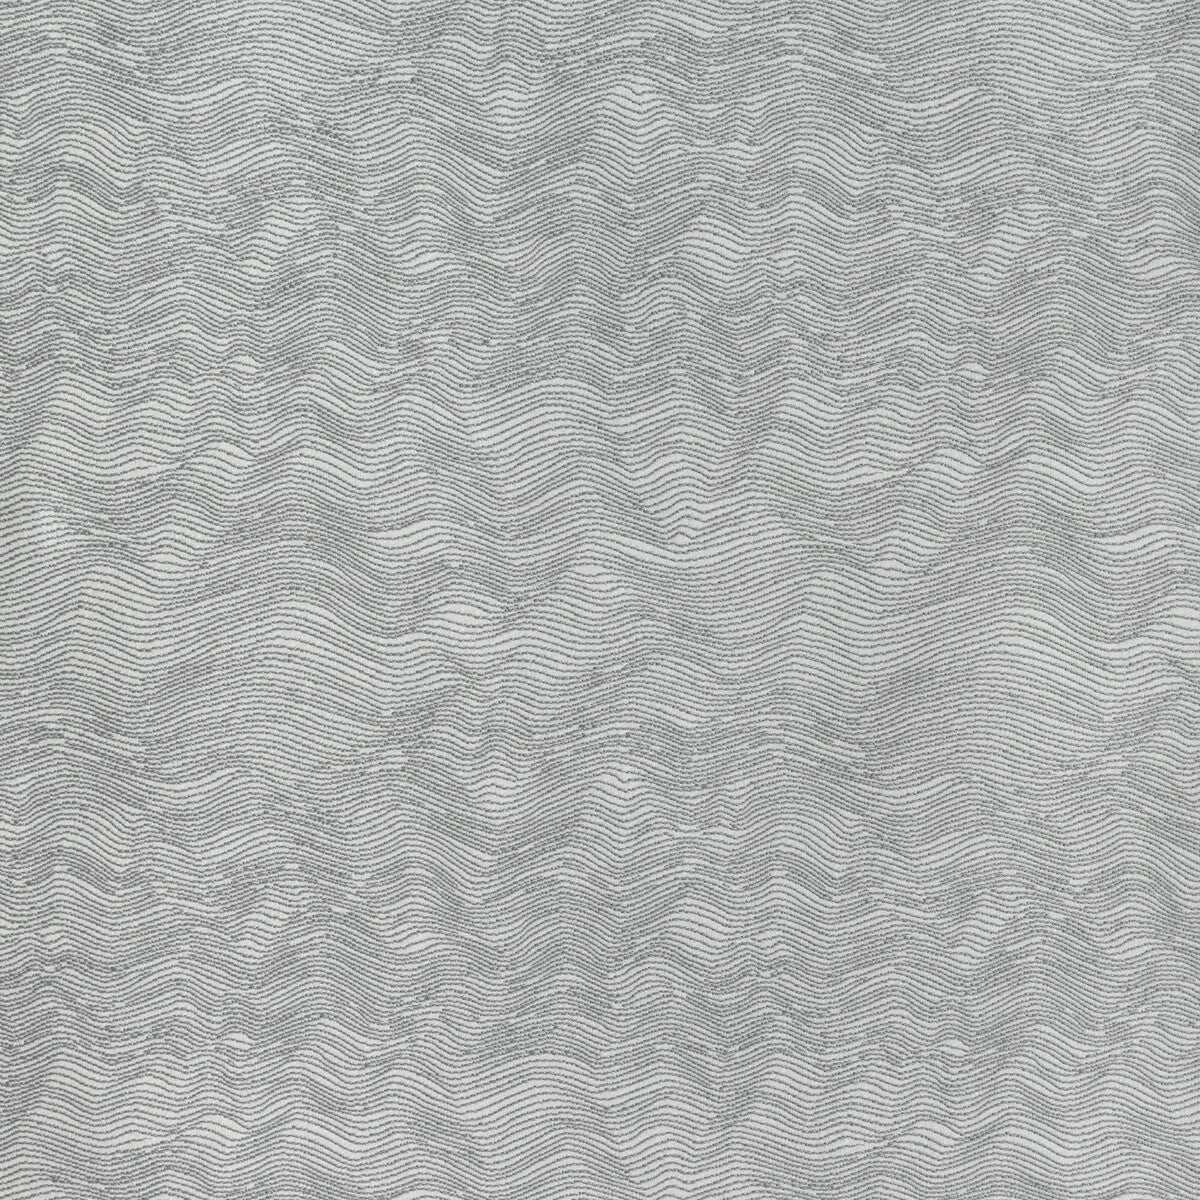 Watery Motion fabric in gull color - pattern 37056.11.0 - by Kravet Design in the Thom Filicia Latitude collection